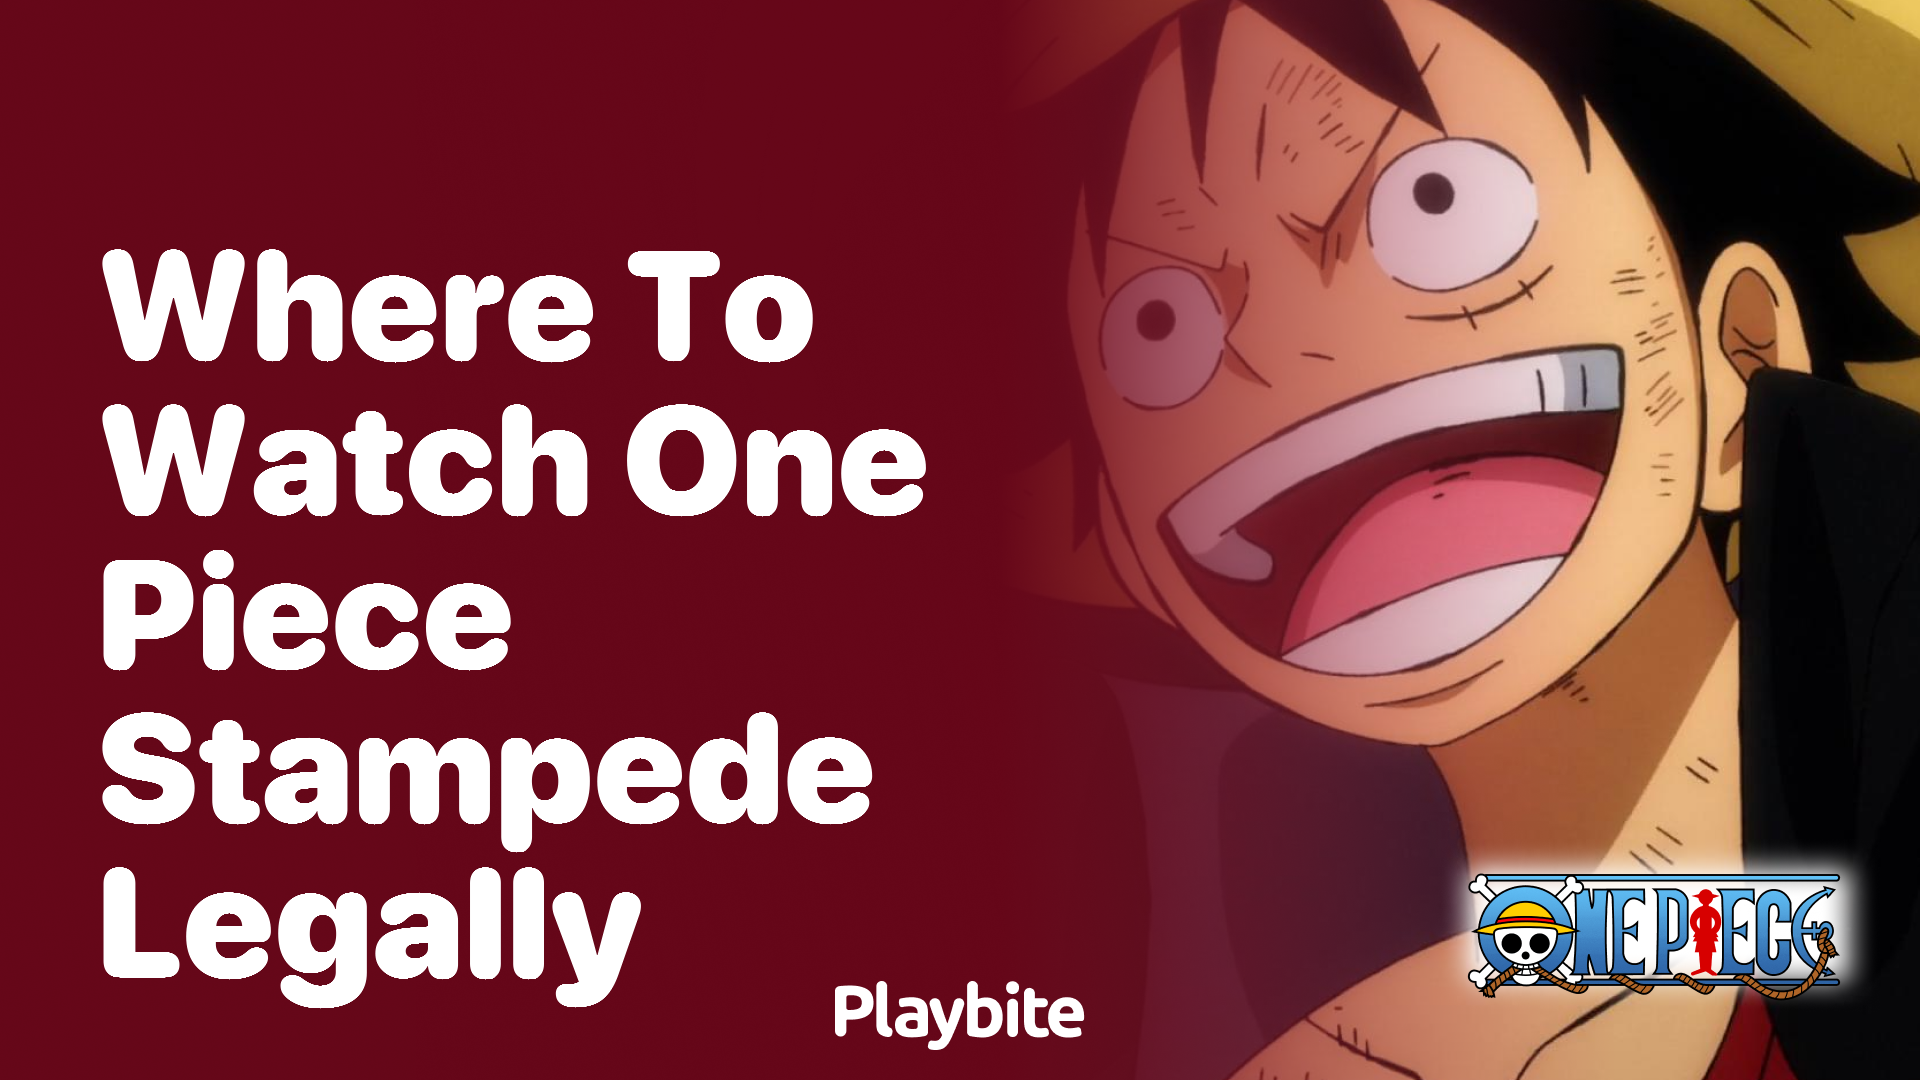 Where to Watch One Piece Stampede Legally